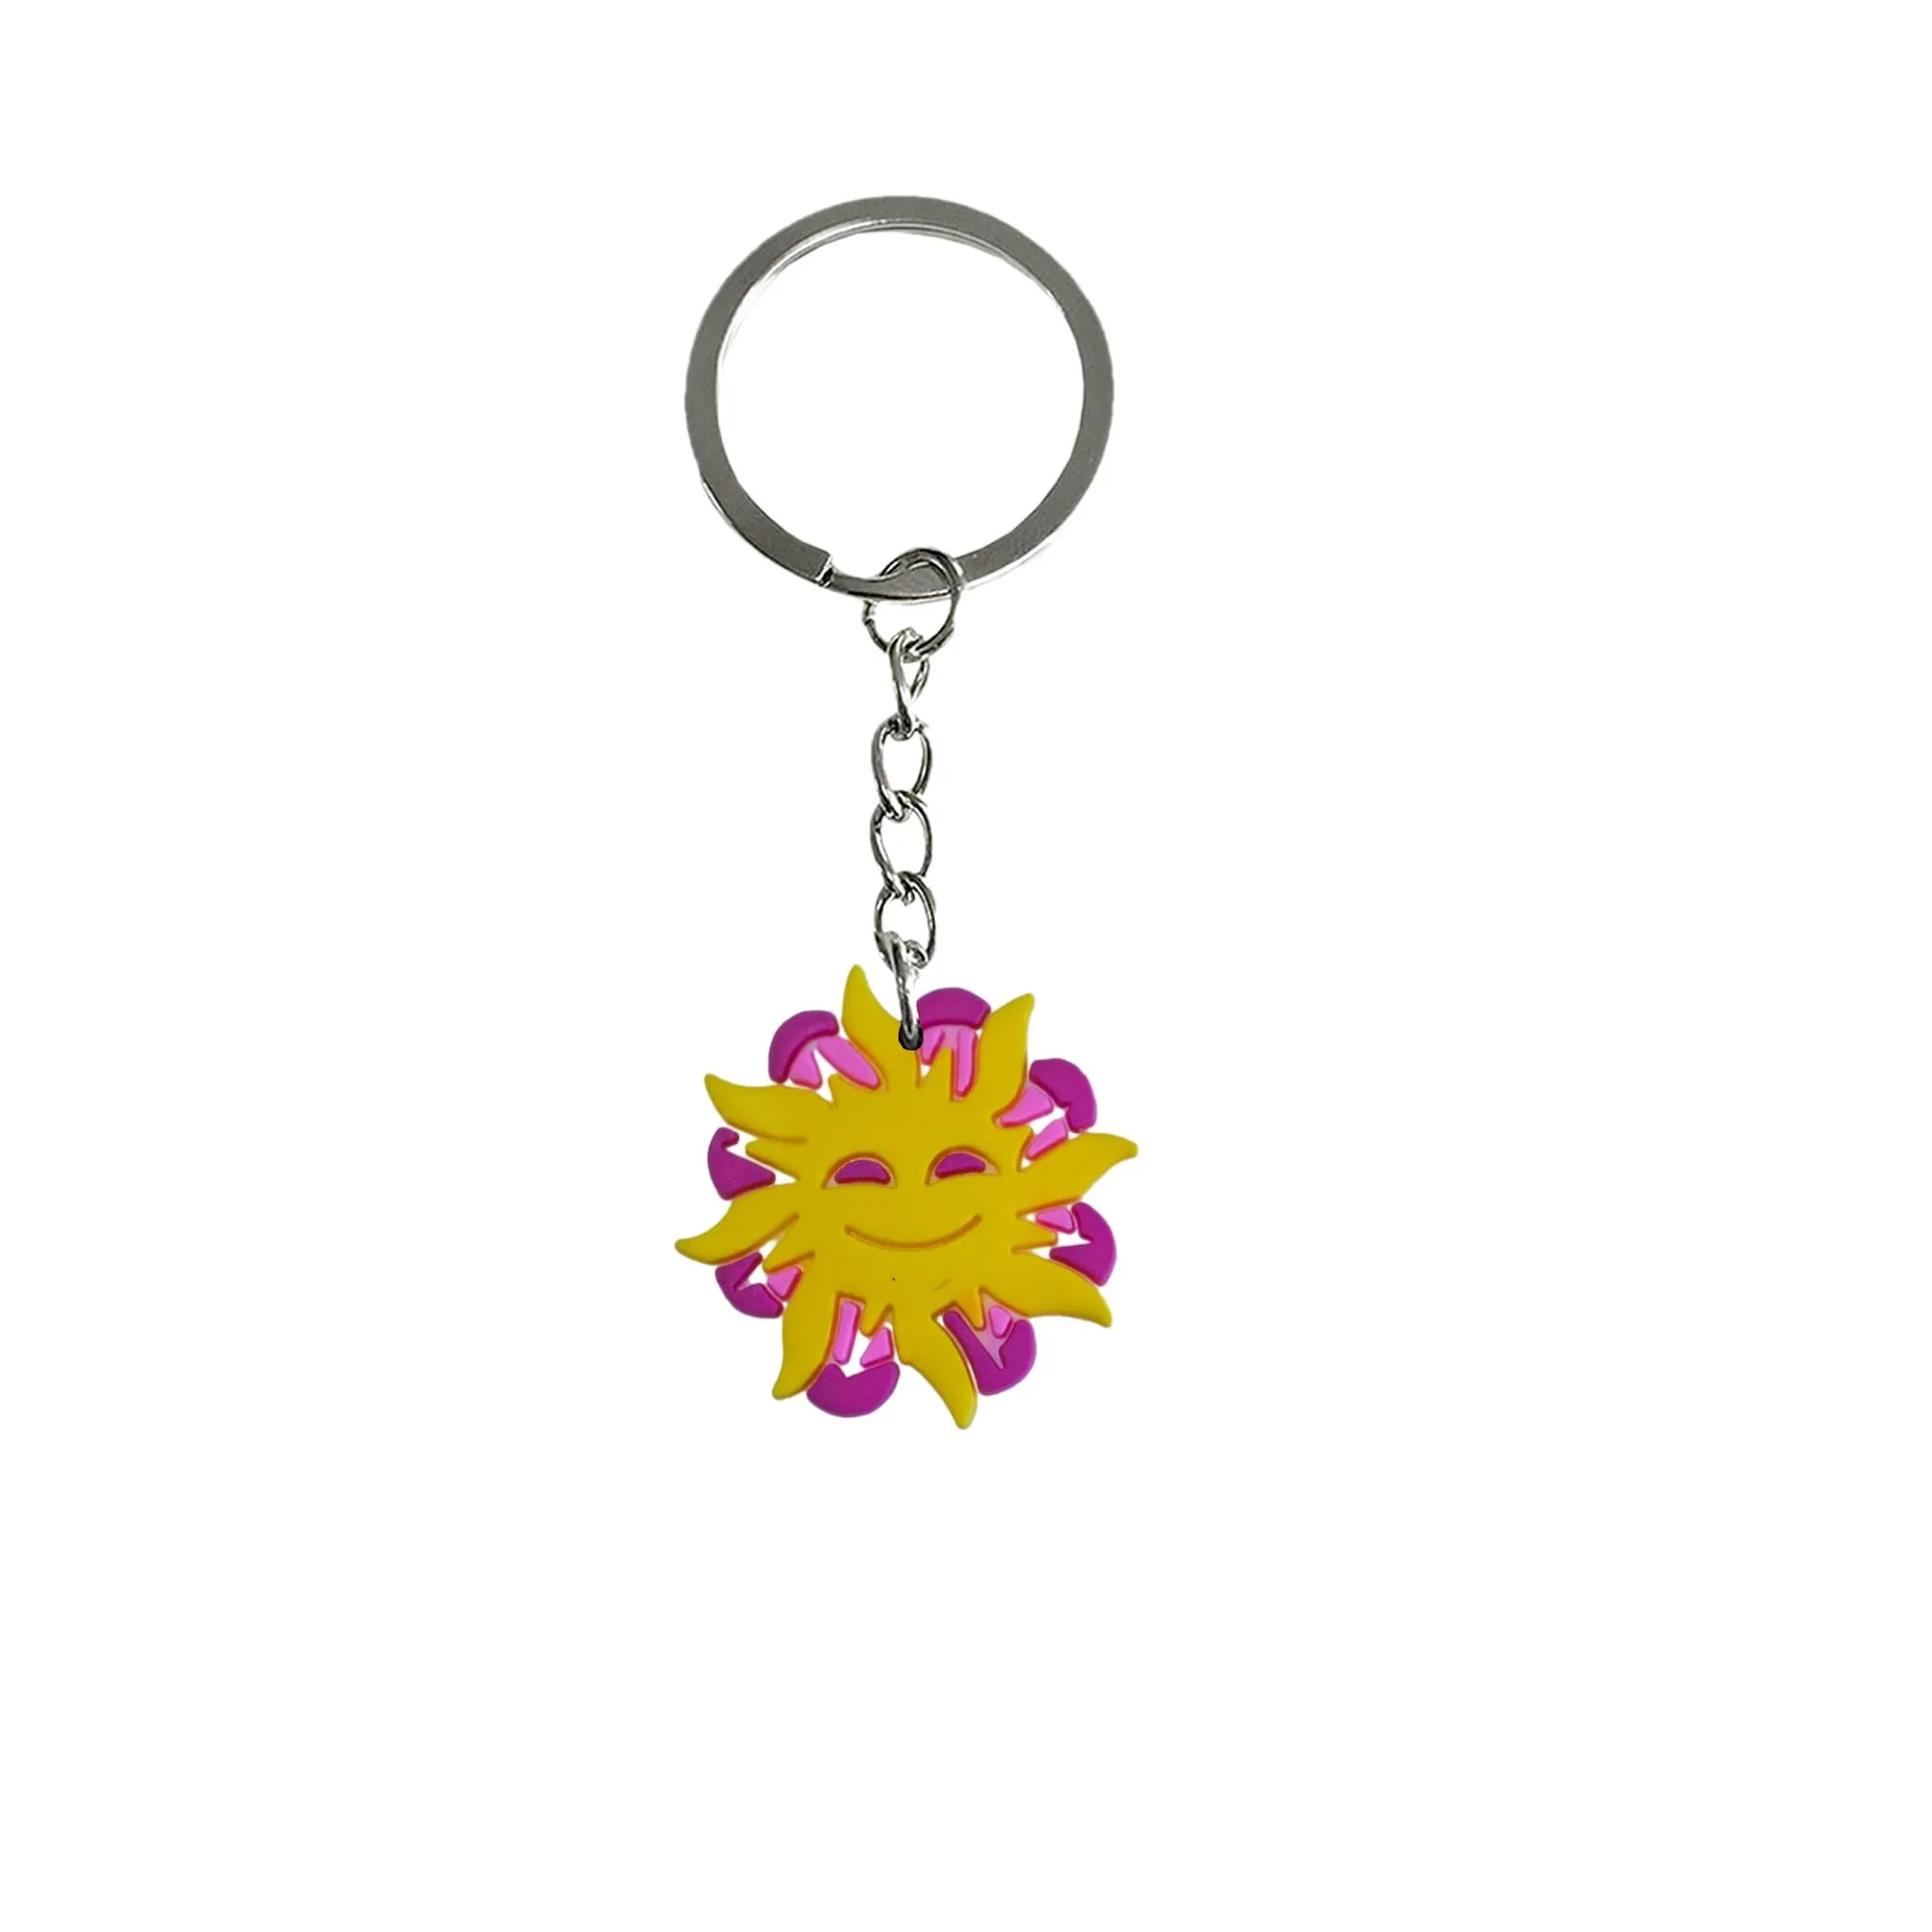 peace theme 26 keychain for classroom prizes goodie bag stuffers supplies keyring men suitable schoolbag key chain girls keychains pendant accessories bags